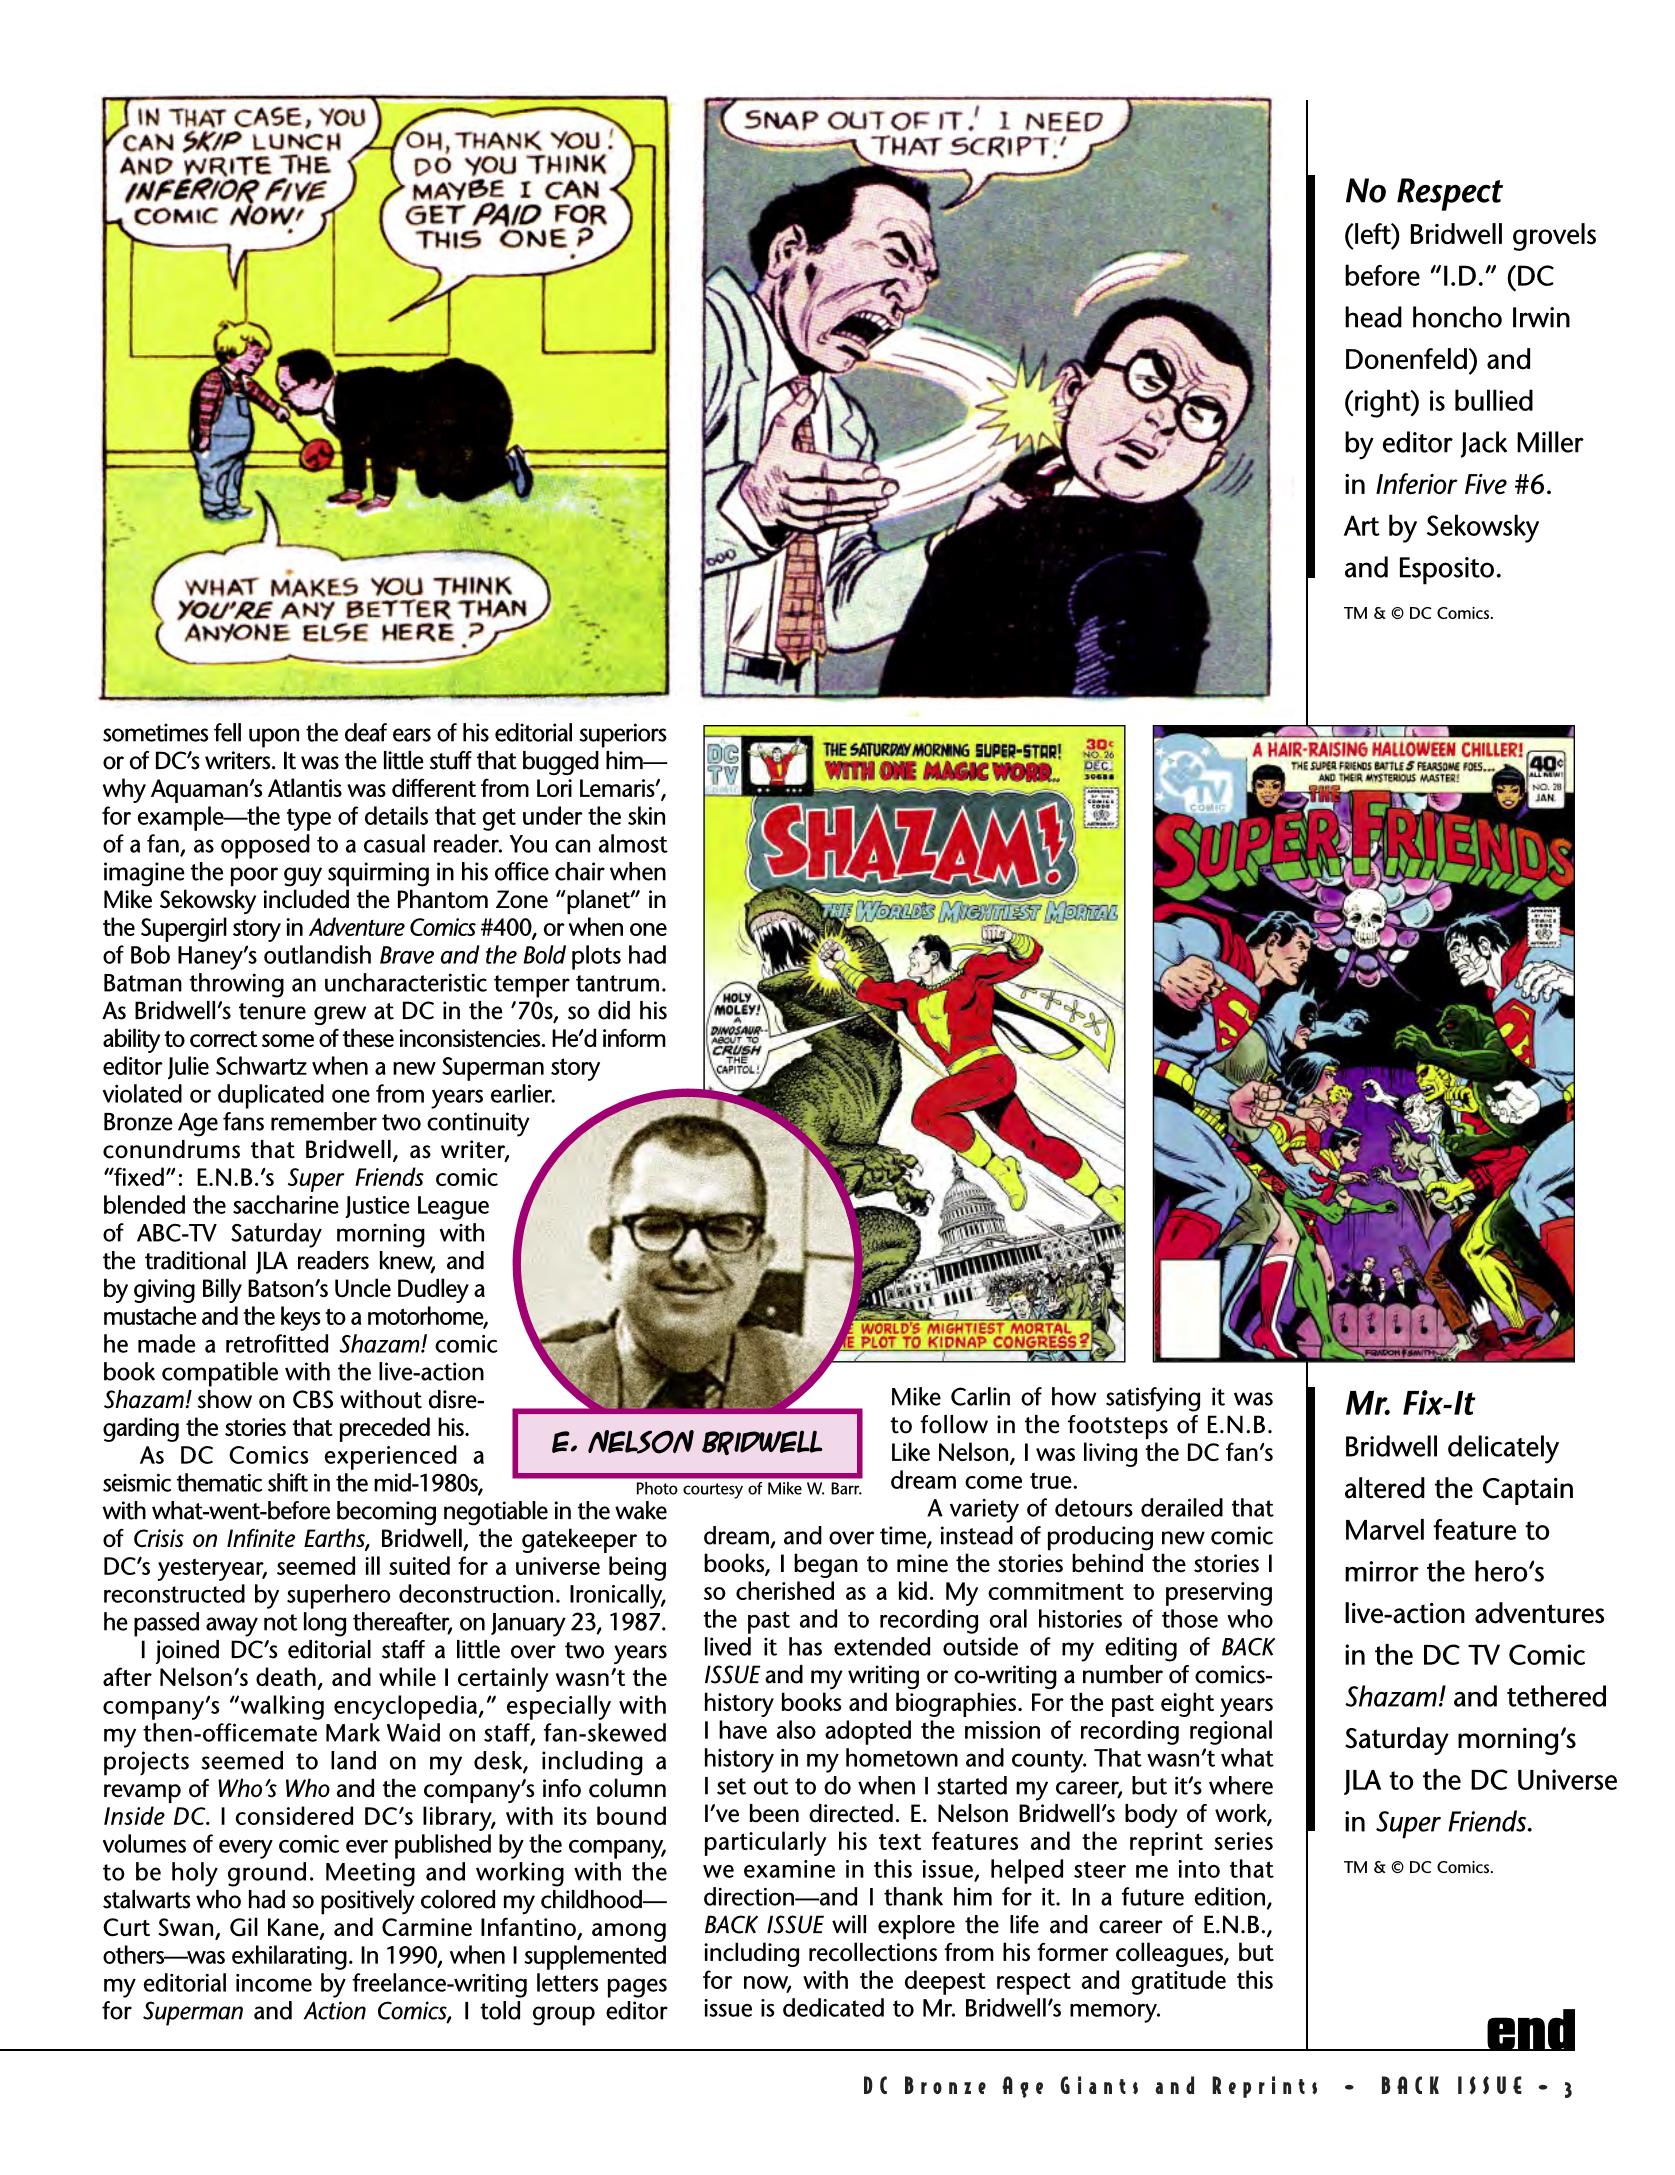 Read online Back Issue comic -  Issue #81 - 5